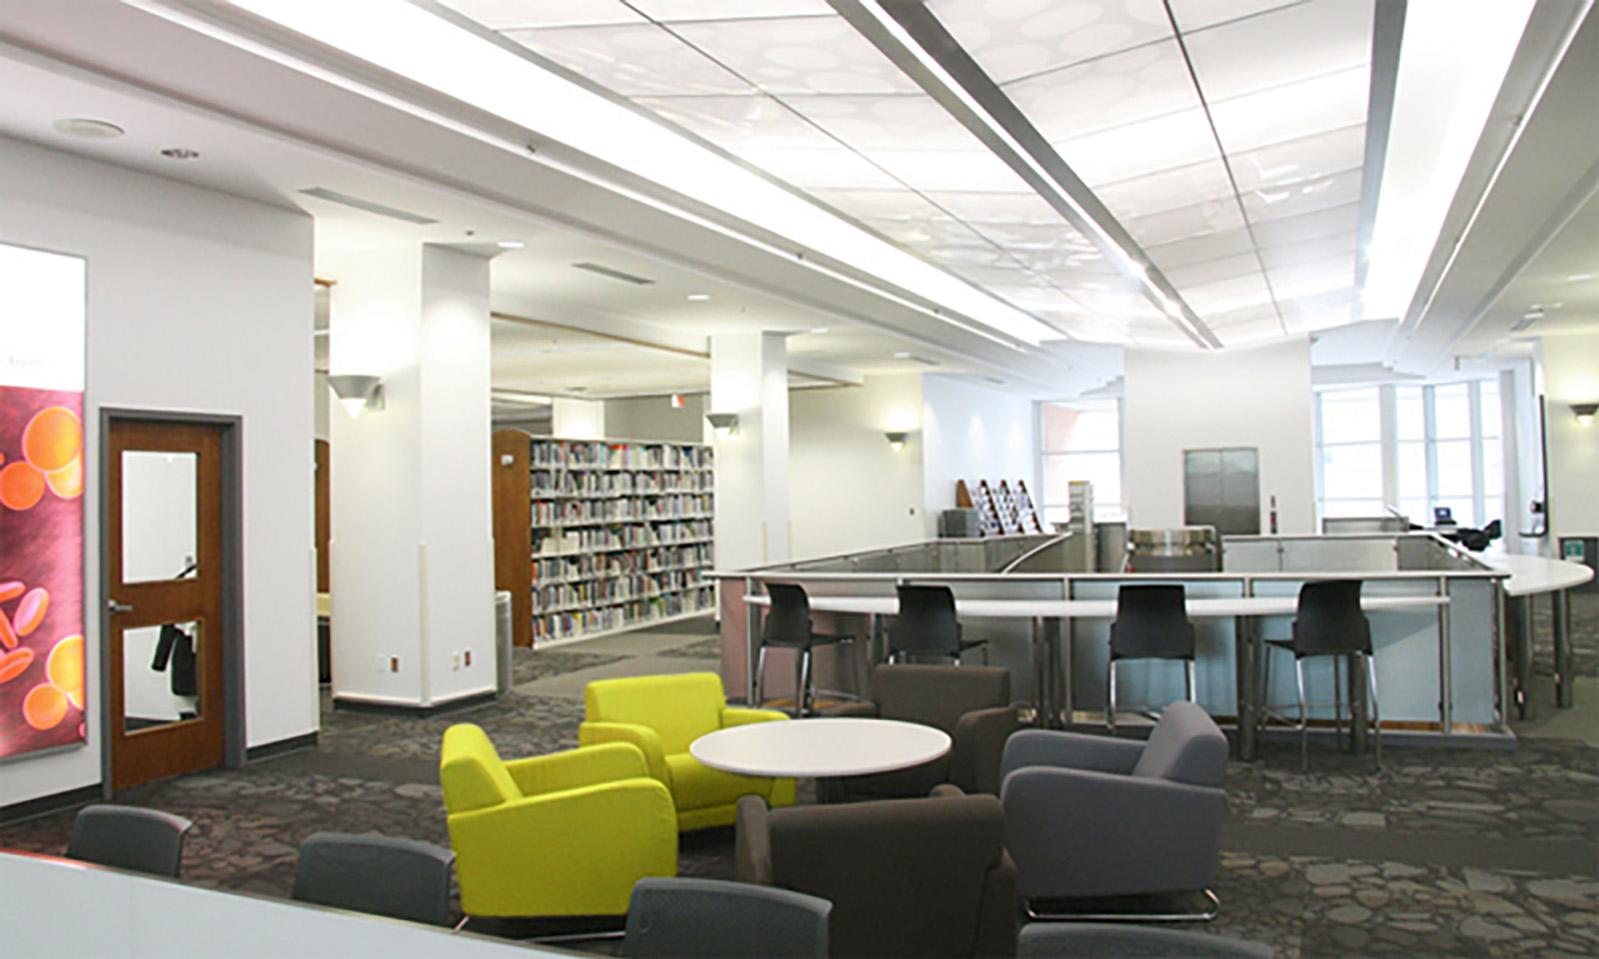 University of Manitoba, Neil John Maclean Library. Open study space with a variety of seating in a spacious open area and book stacks in the background.